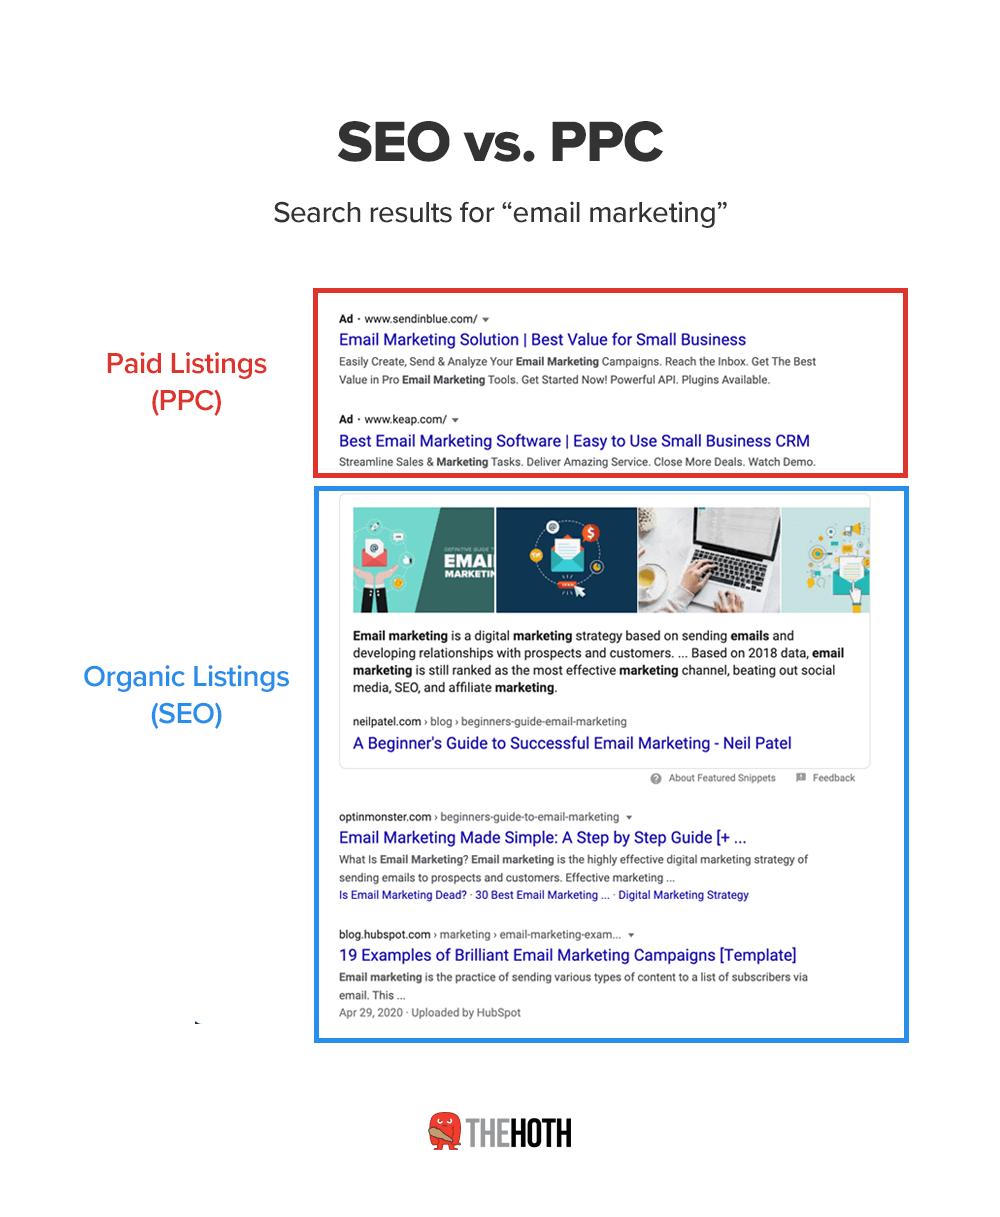 Search results for "email marketing" showing locations of PPC and SEO listings.